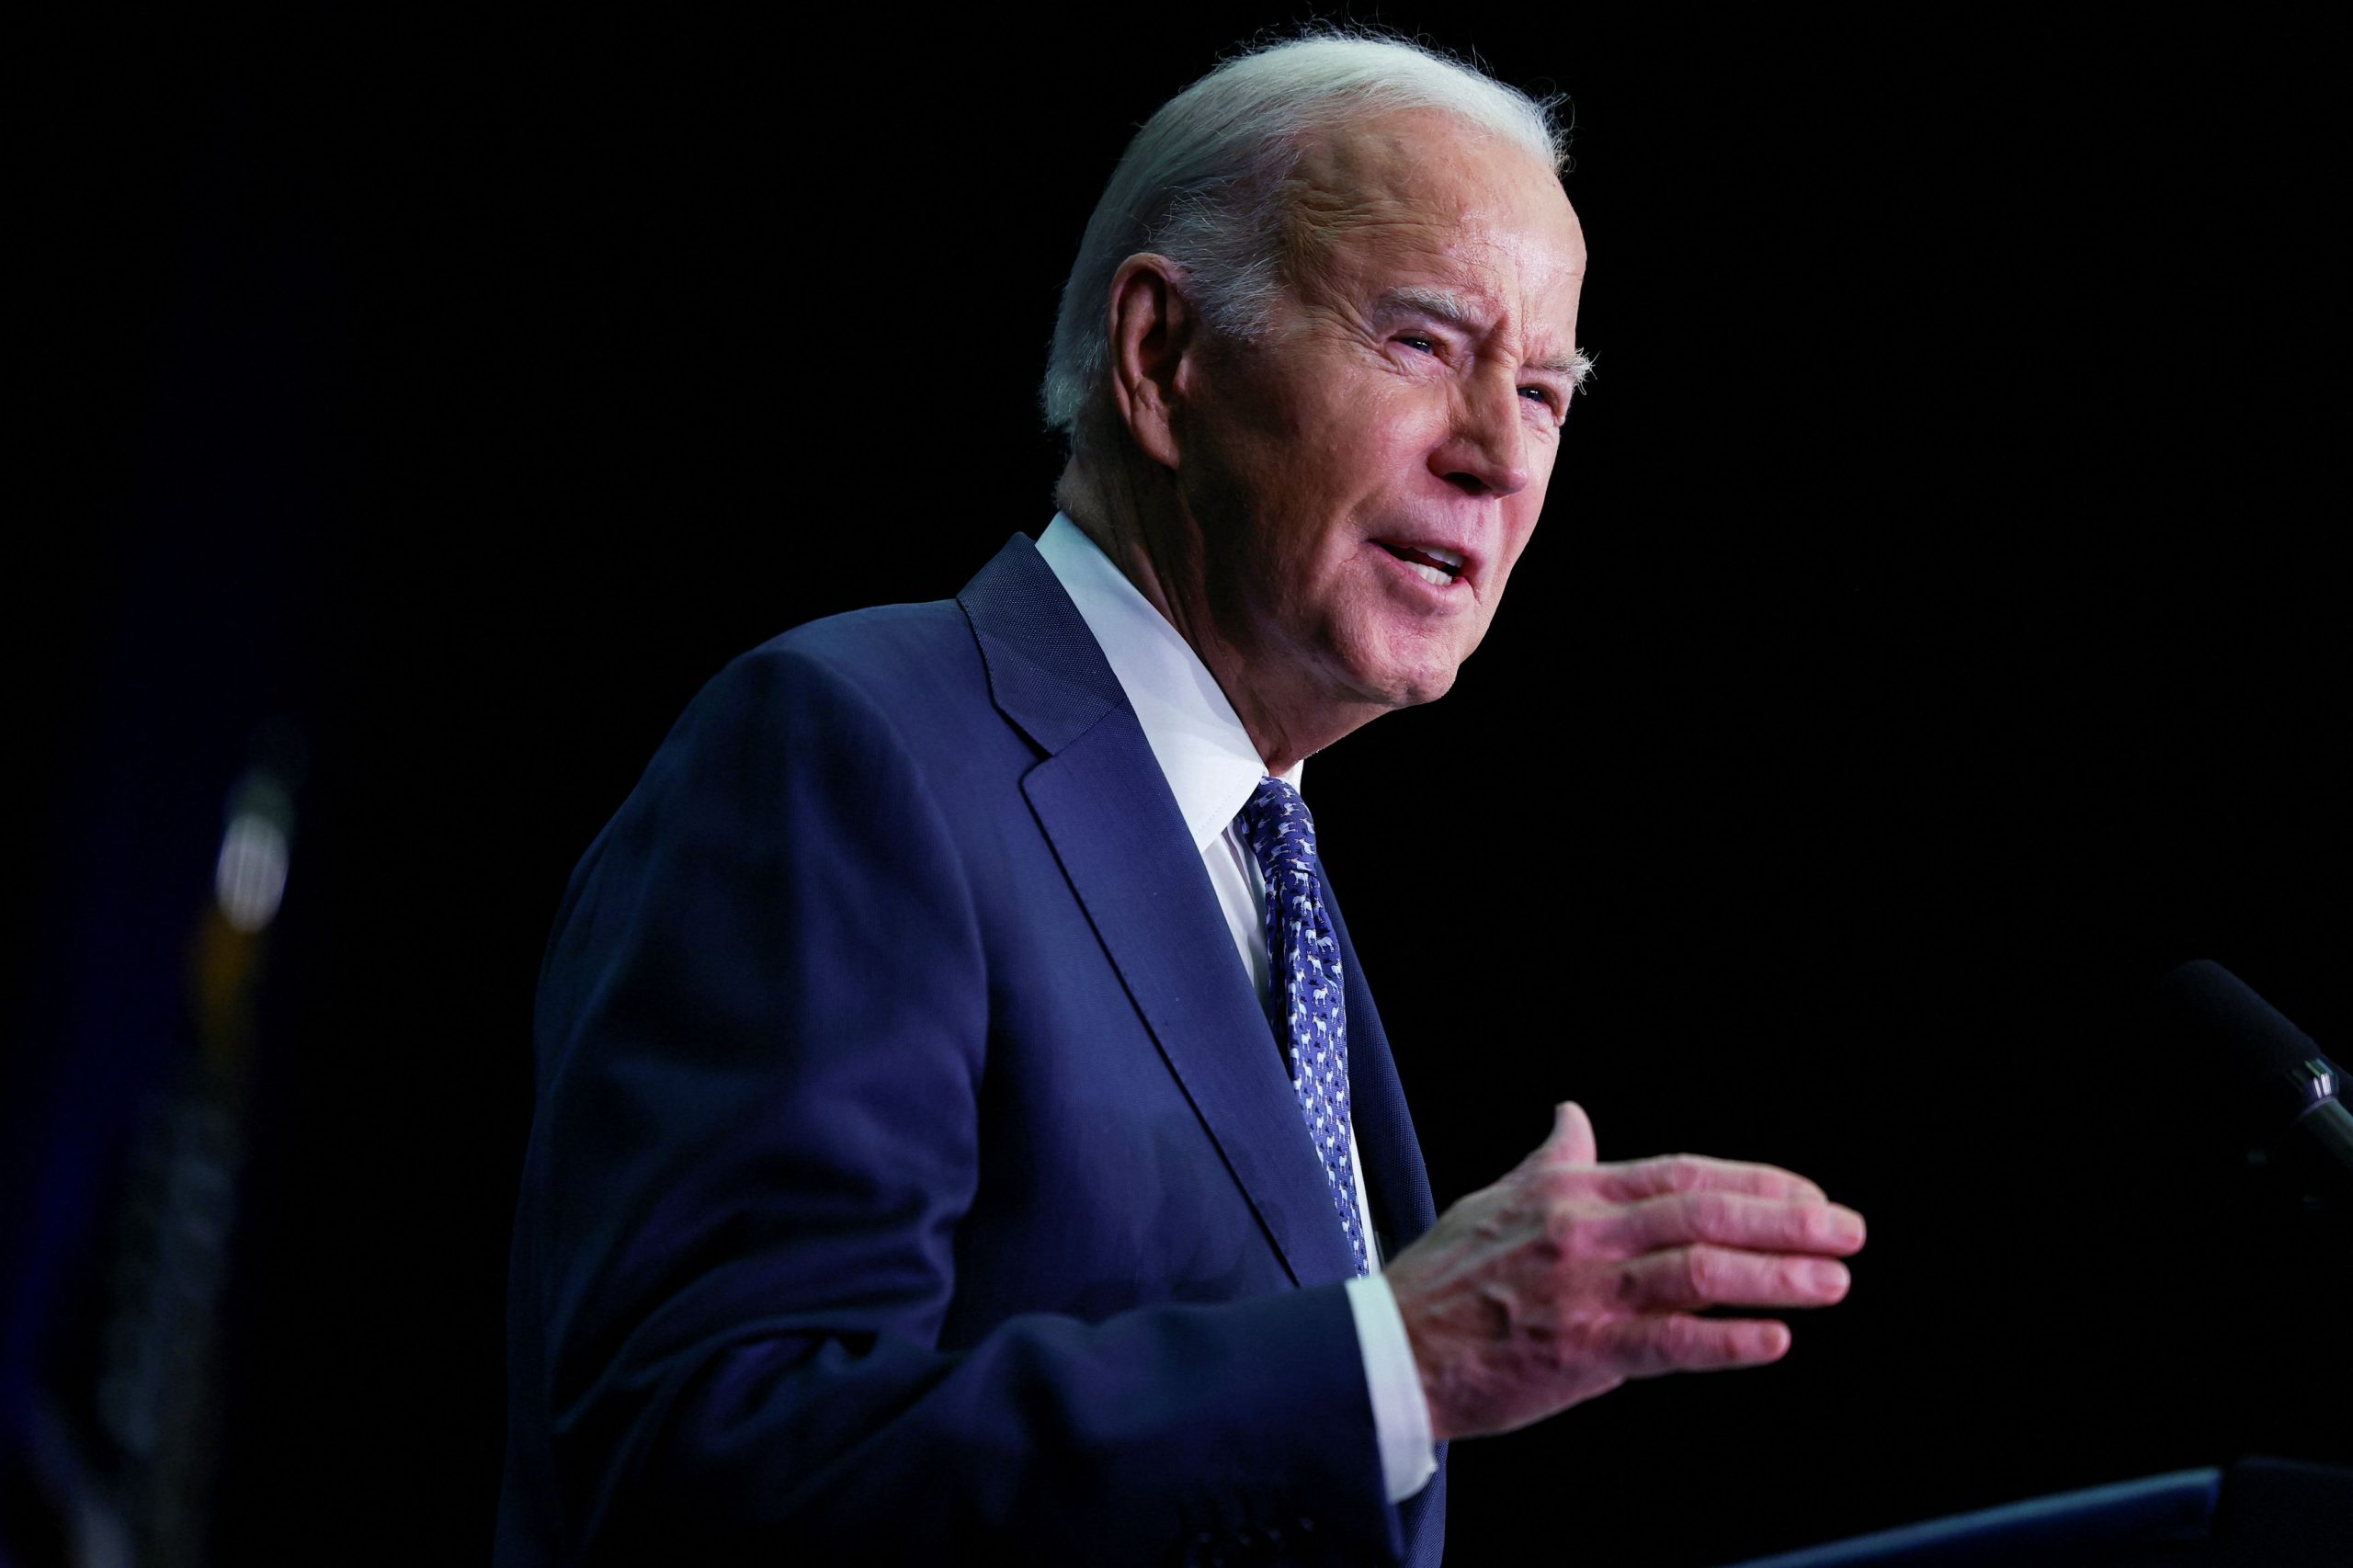 Biden’s Age Back in Spotlight After Special Counsel Report, Verbal Flubs